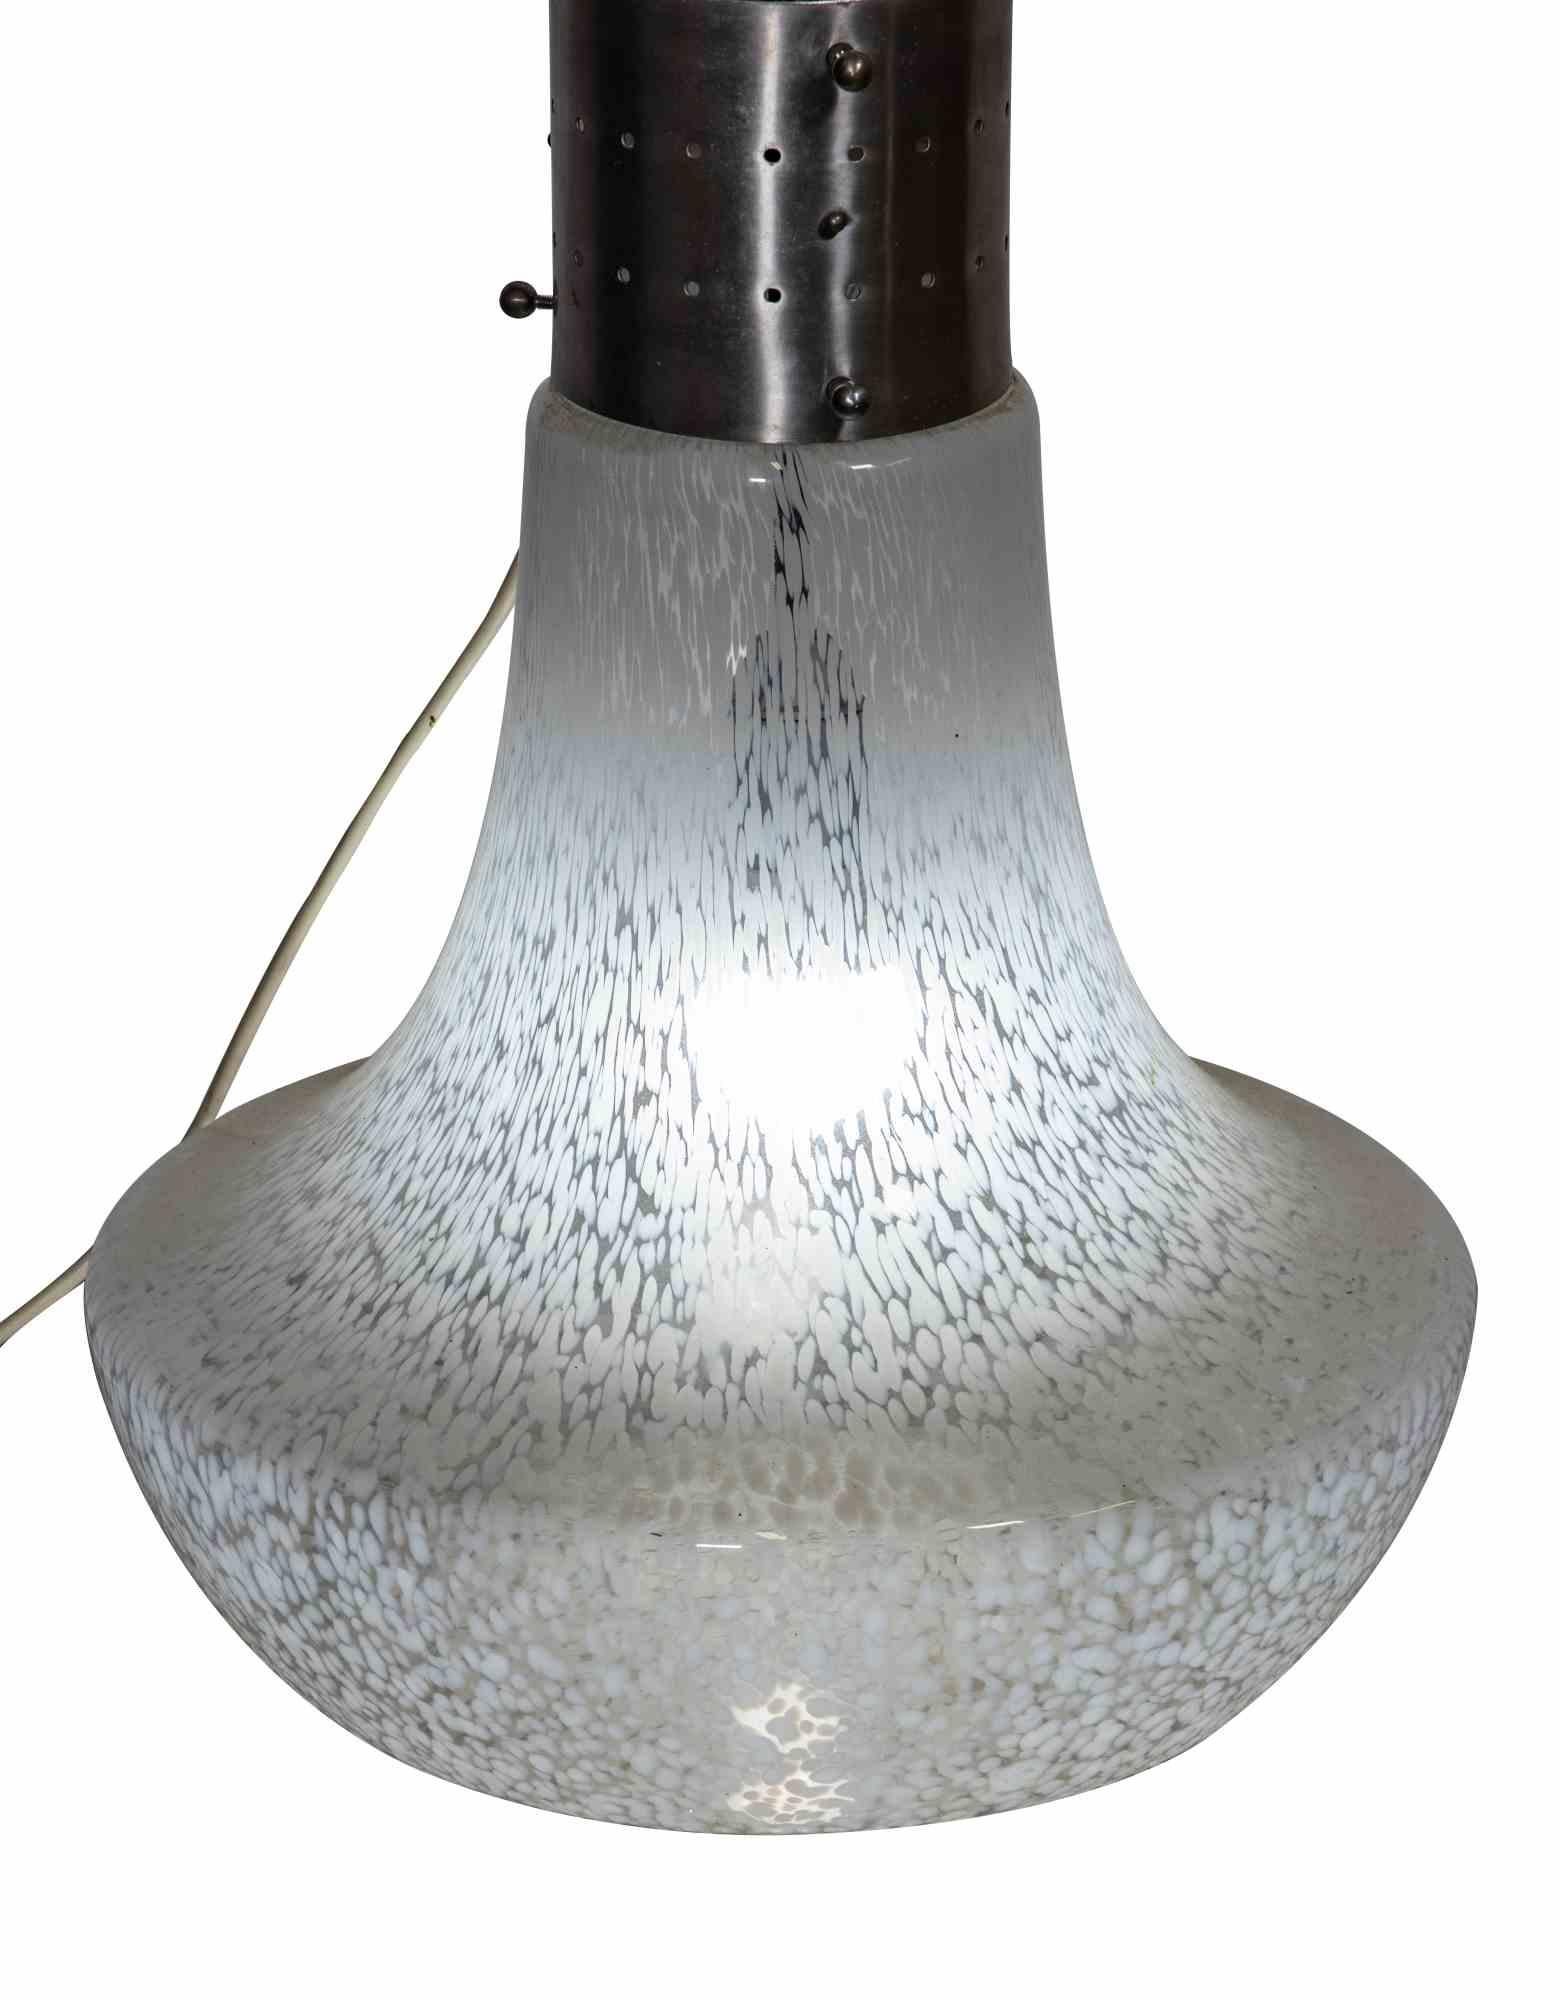 Table lamp is a Mid-Century Modern floor lamp realized by Carlo Nason.

Produced in Italy.

This lamp is realized by two elements in murano glass connected by a steel part in the center.

Carlo Nason was born into a family of expert